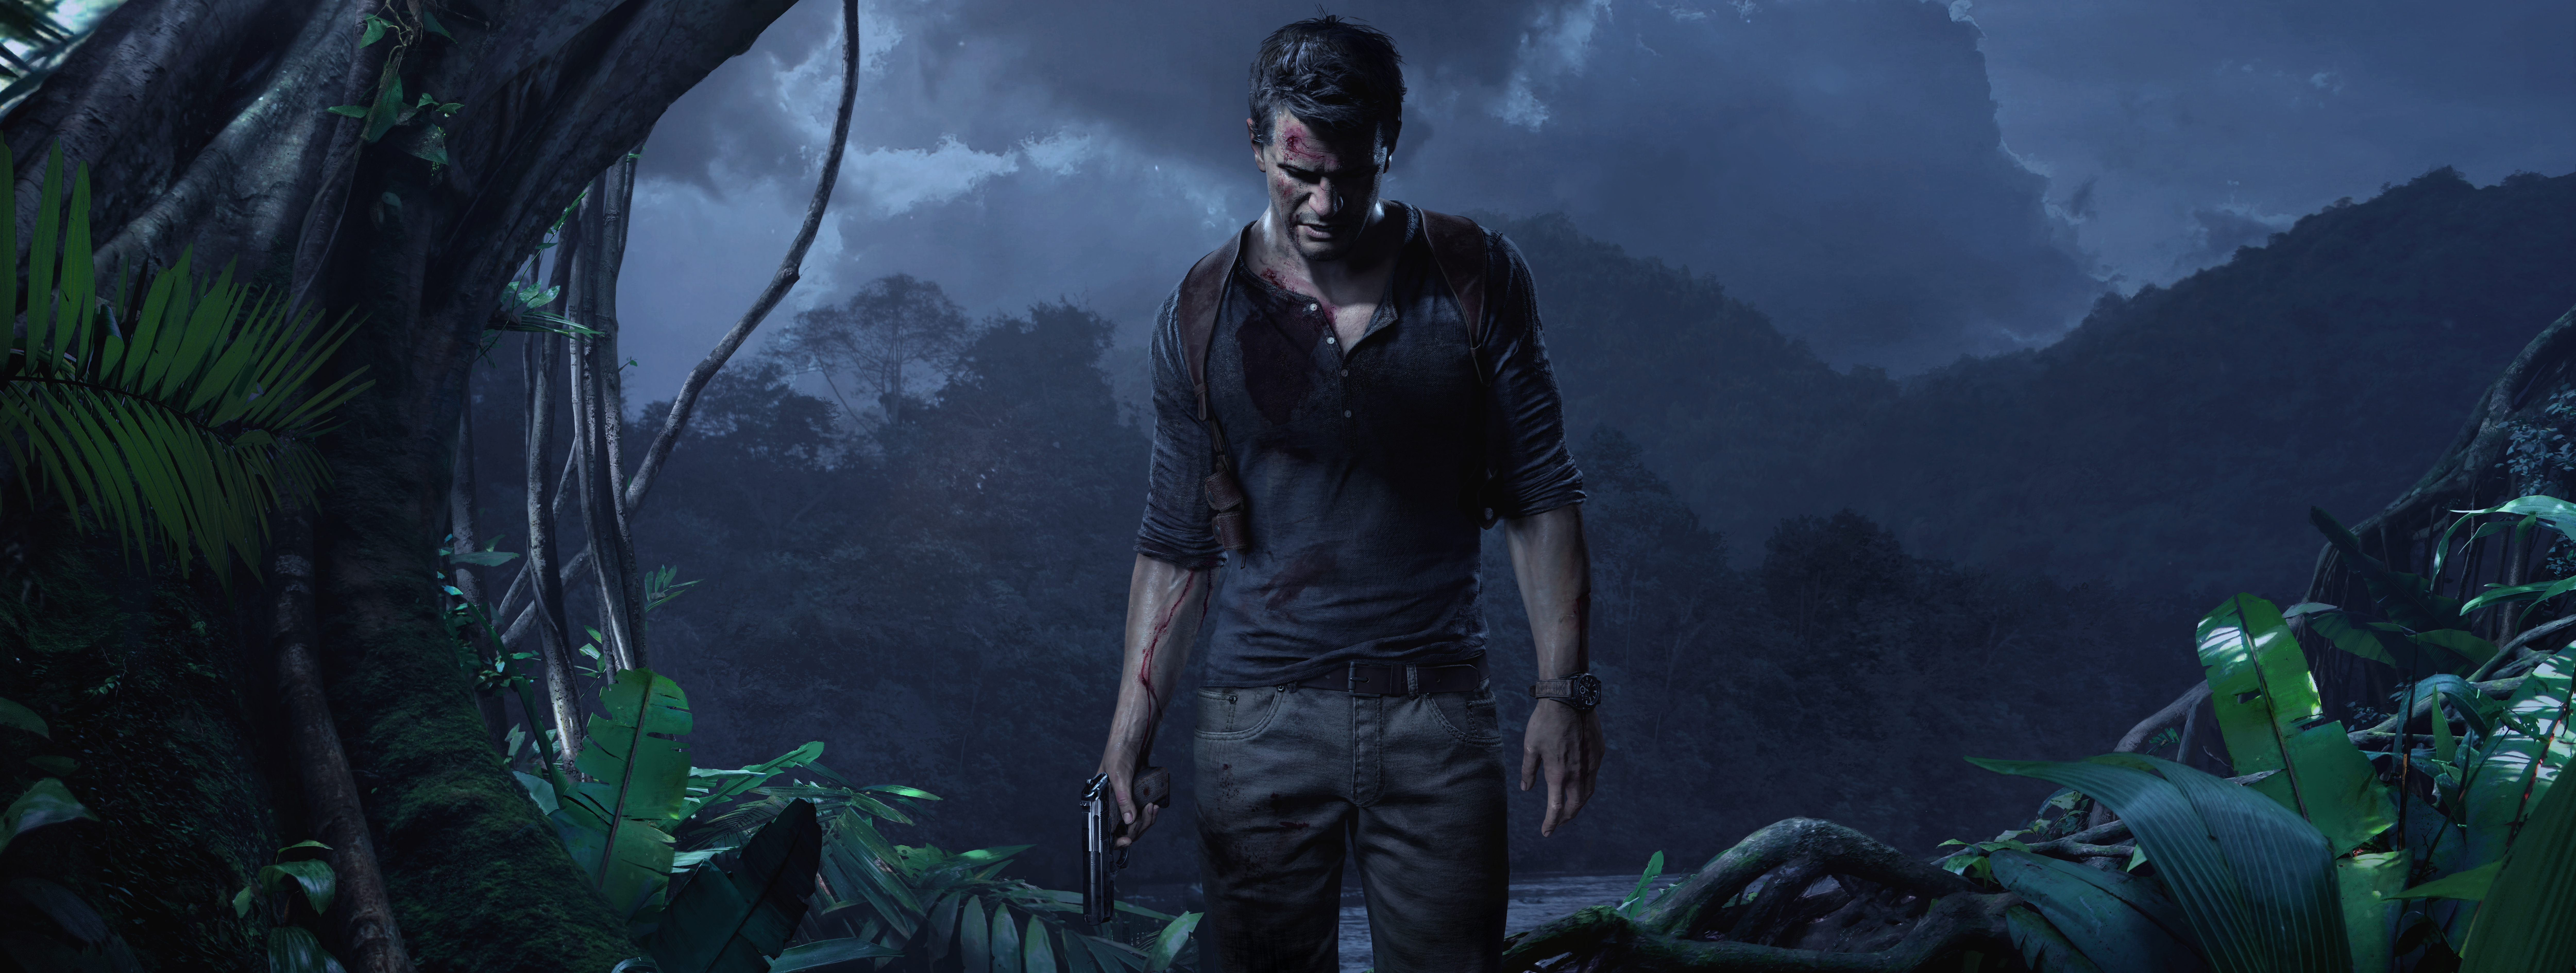 Uncharted 4: A Thief's End 4k Ultra HD Wallpaper